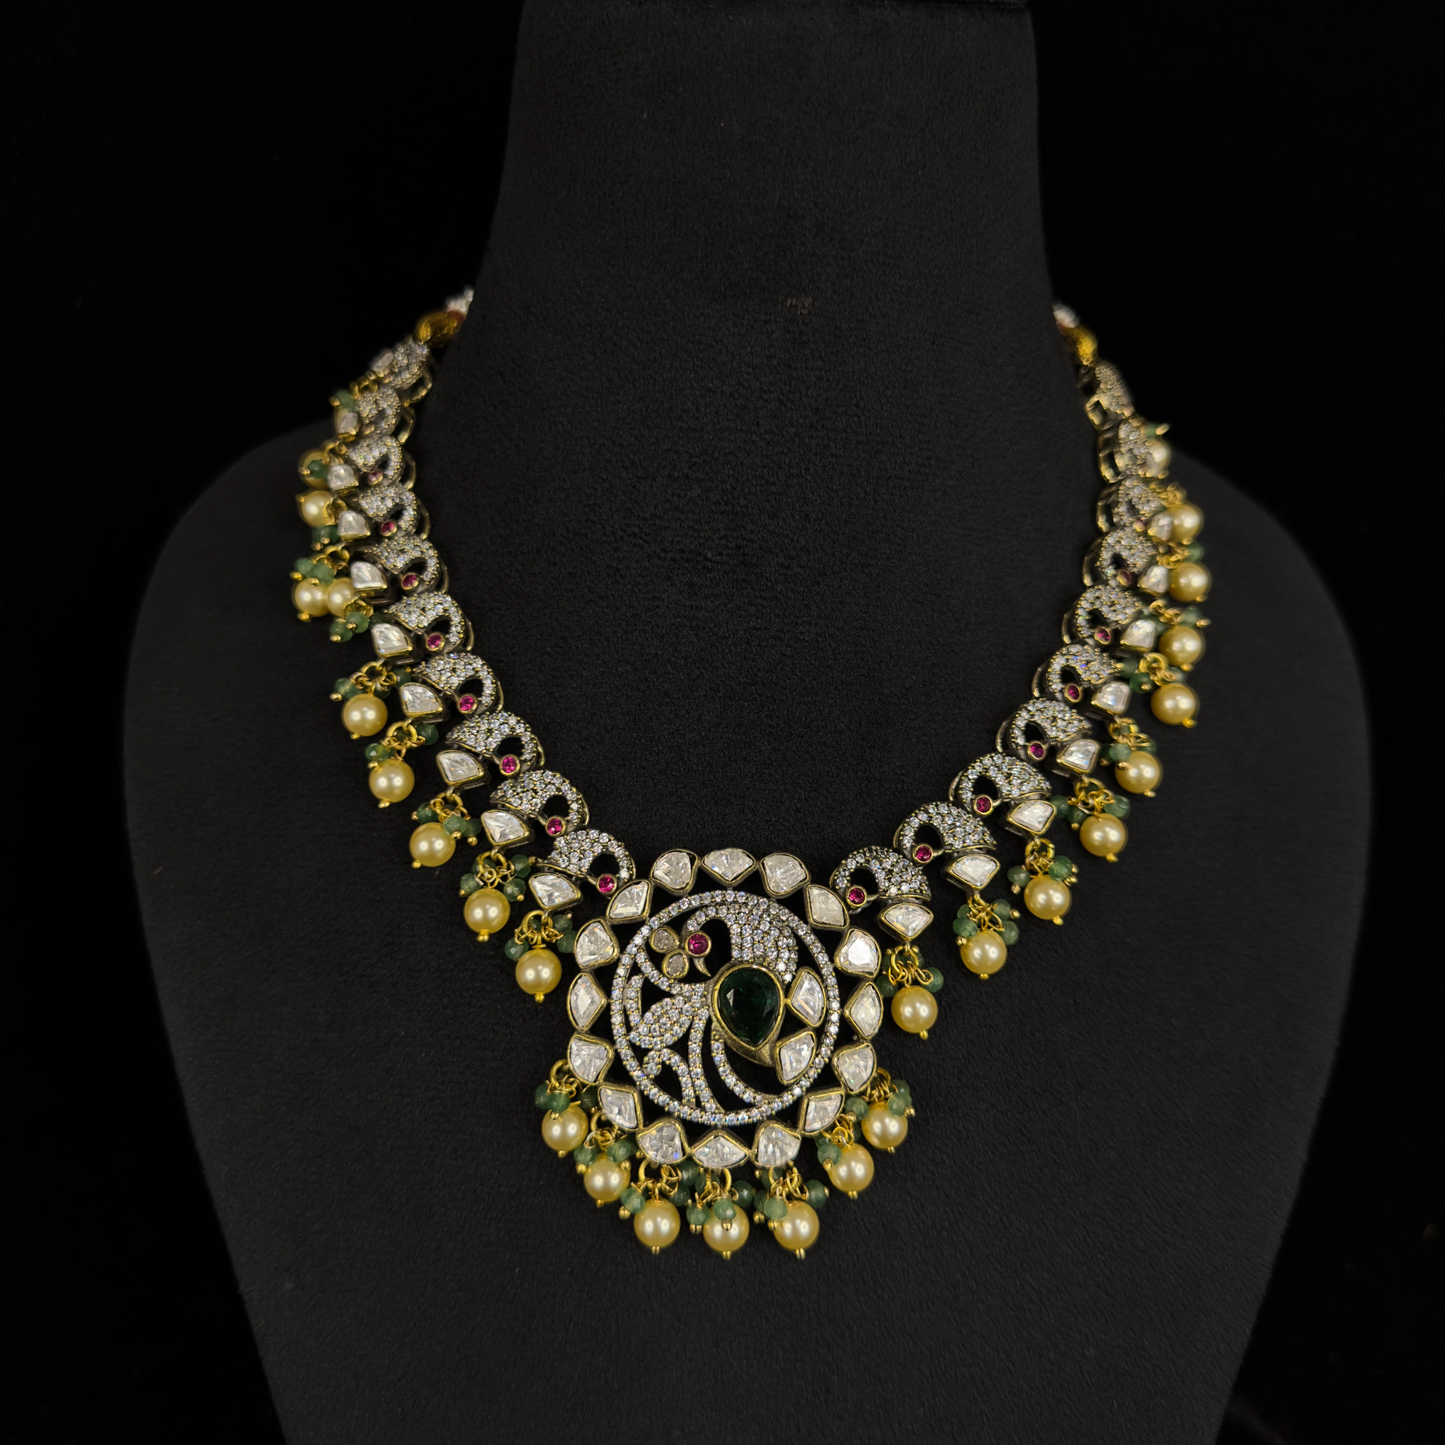 Victorian Moissanite Peacock Necklace with earrings